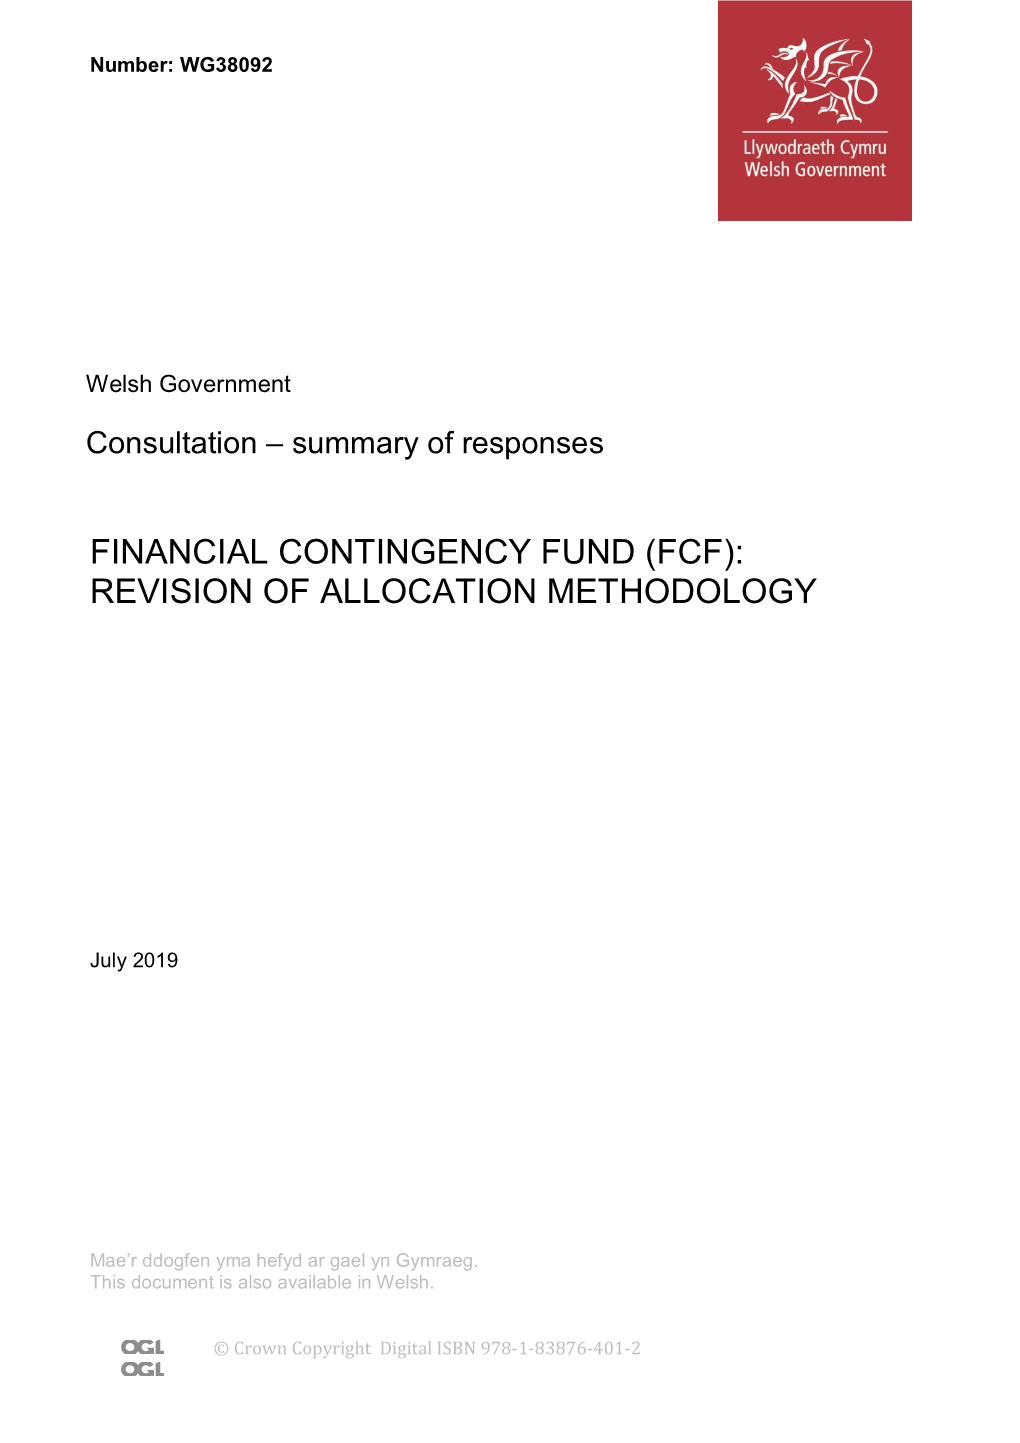 Financial Contingency Fund (Fcf): Revision of Allocation Methodology